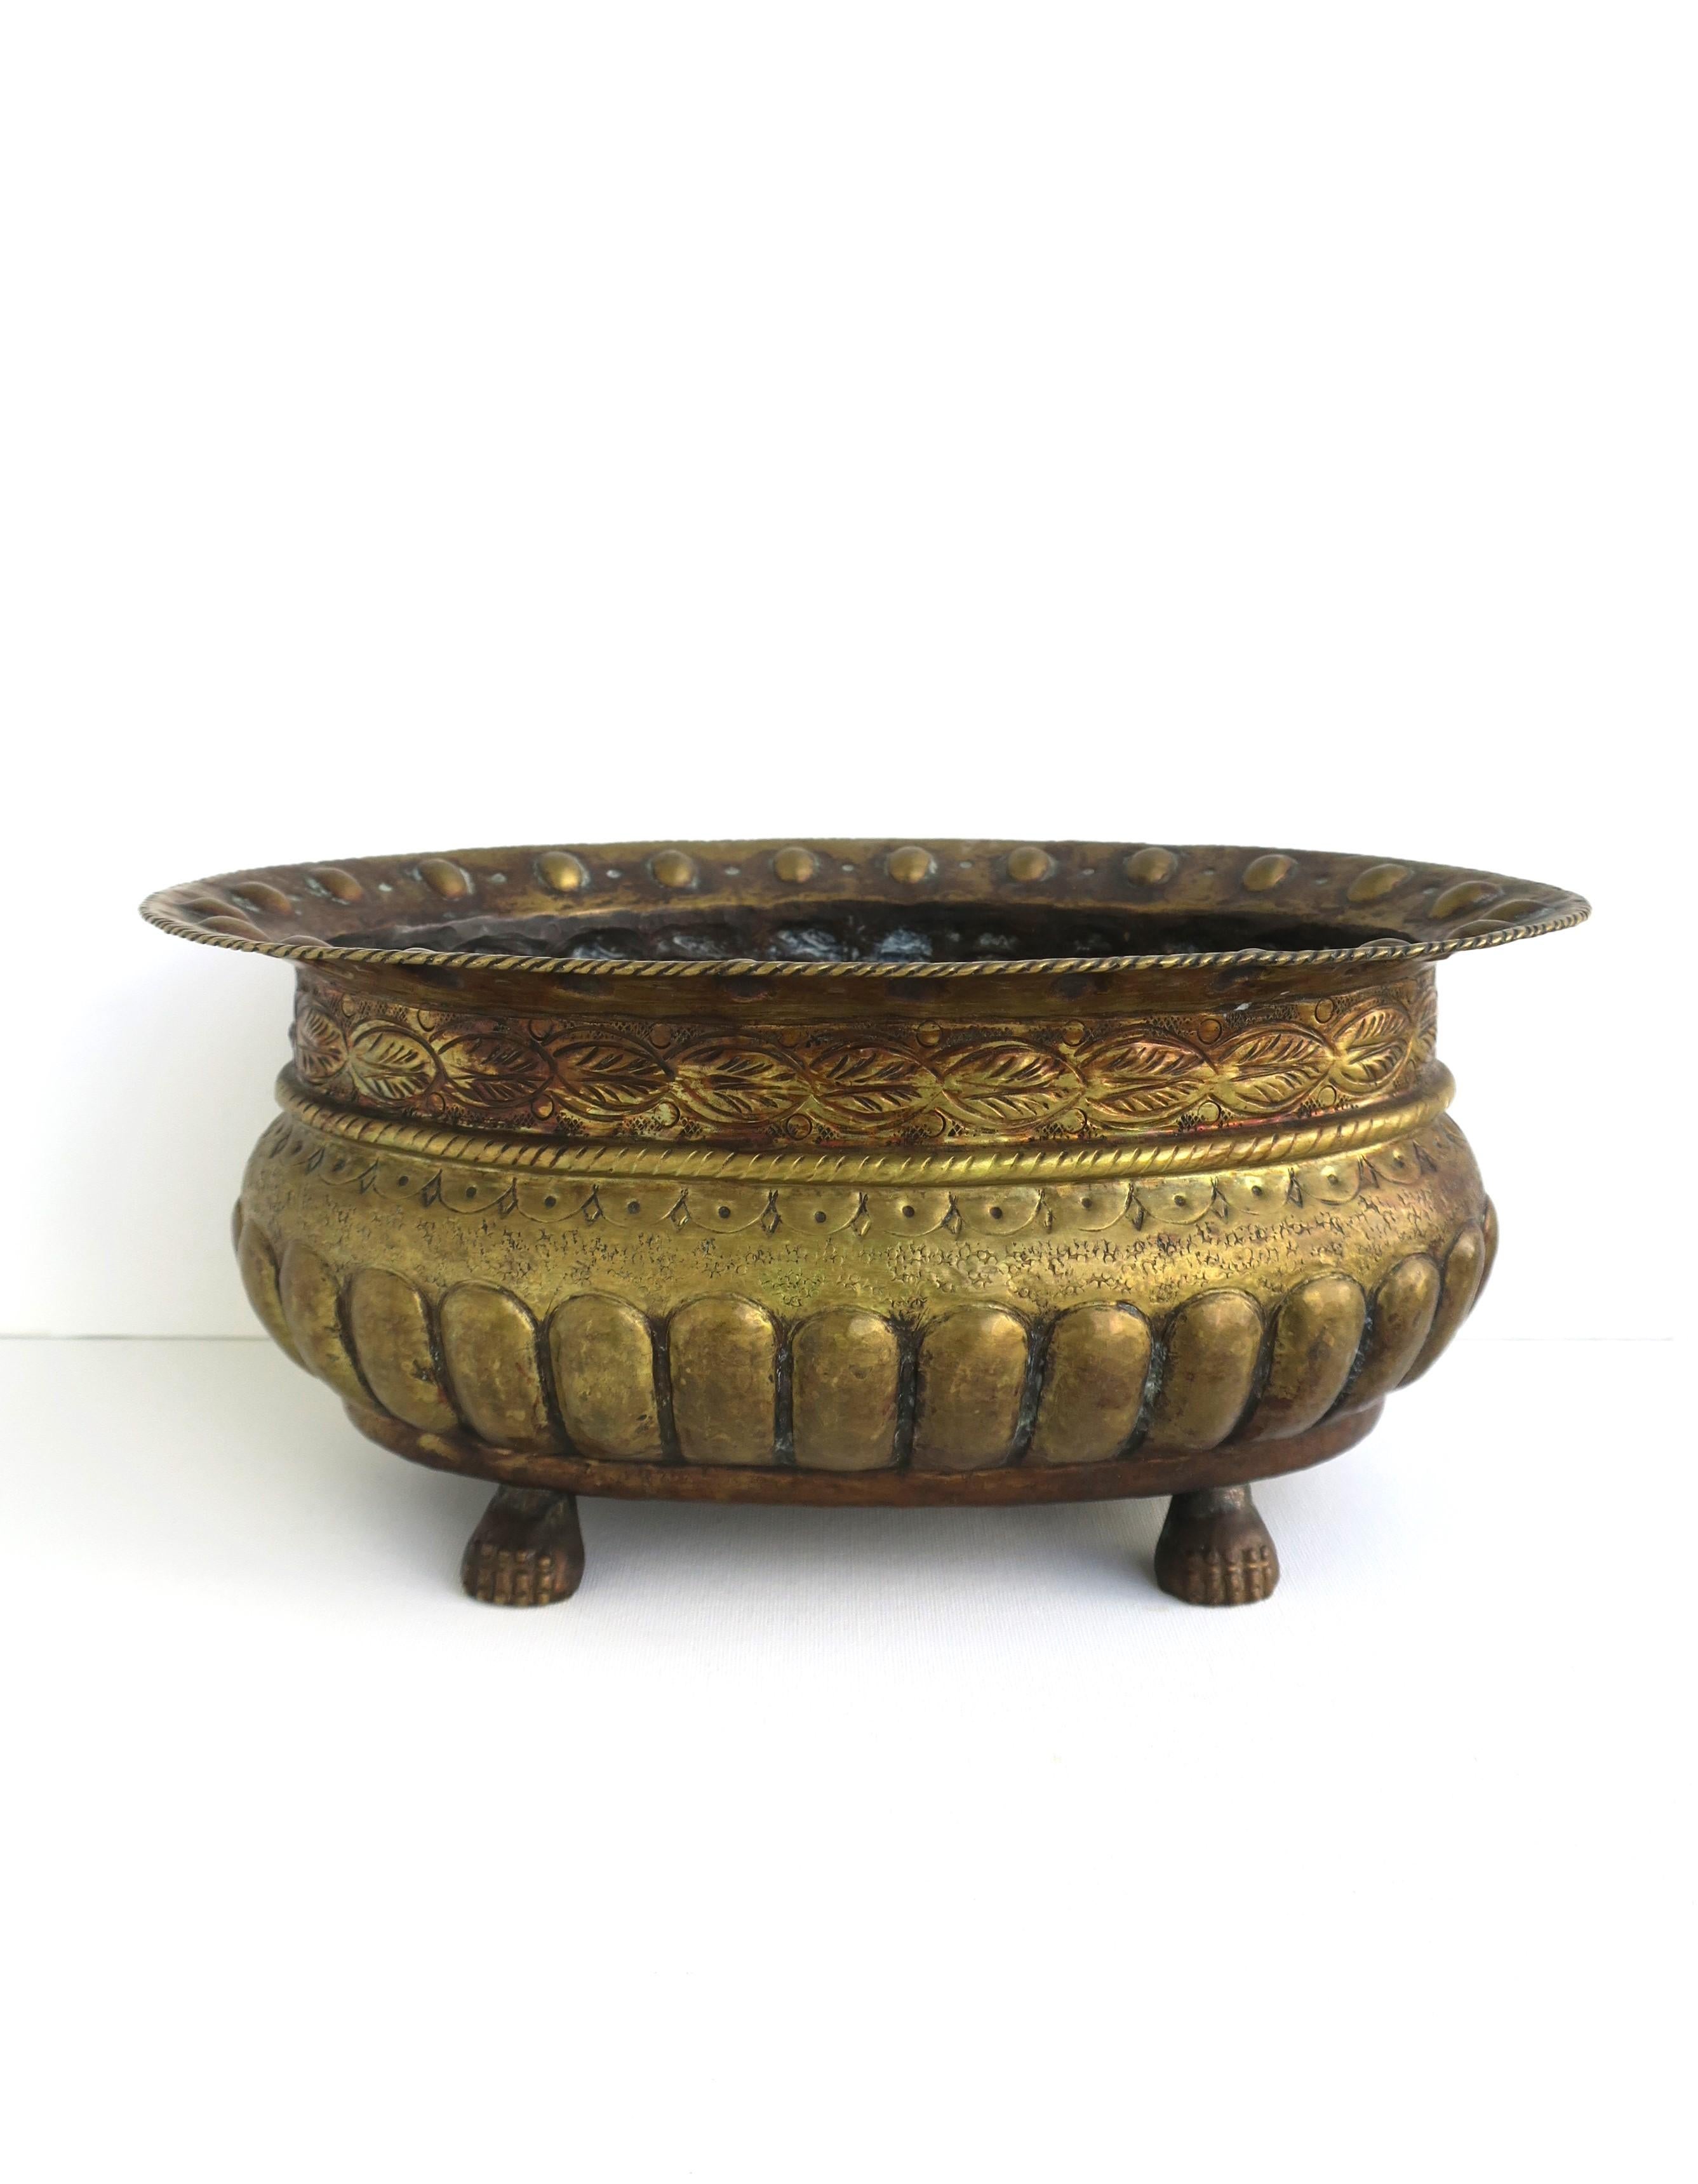 An Italian brass flower or plant pot planter holder cachepot jardiniere with lion paw feet, in the Empire style, circa 20th-century, Italy. A great piece with a repousse and hammered design, finished with lion paw feet. Perfect to hold and display